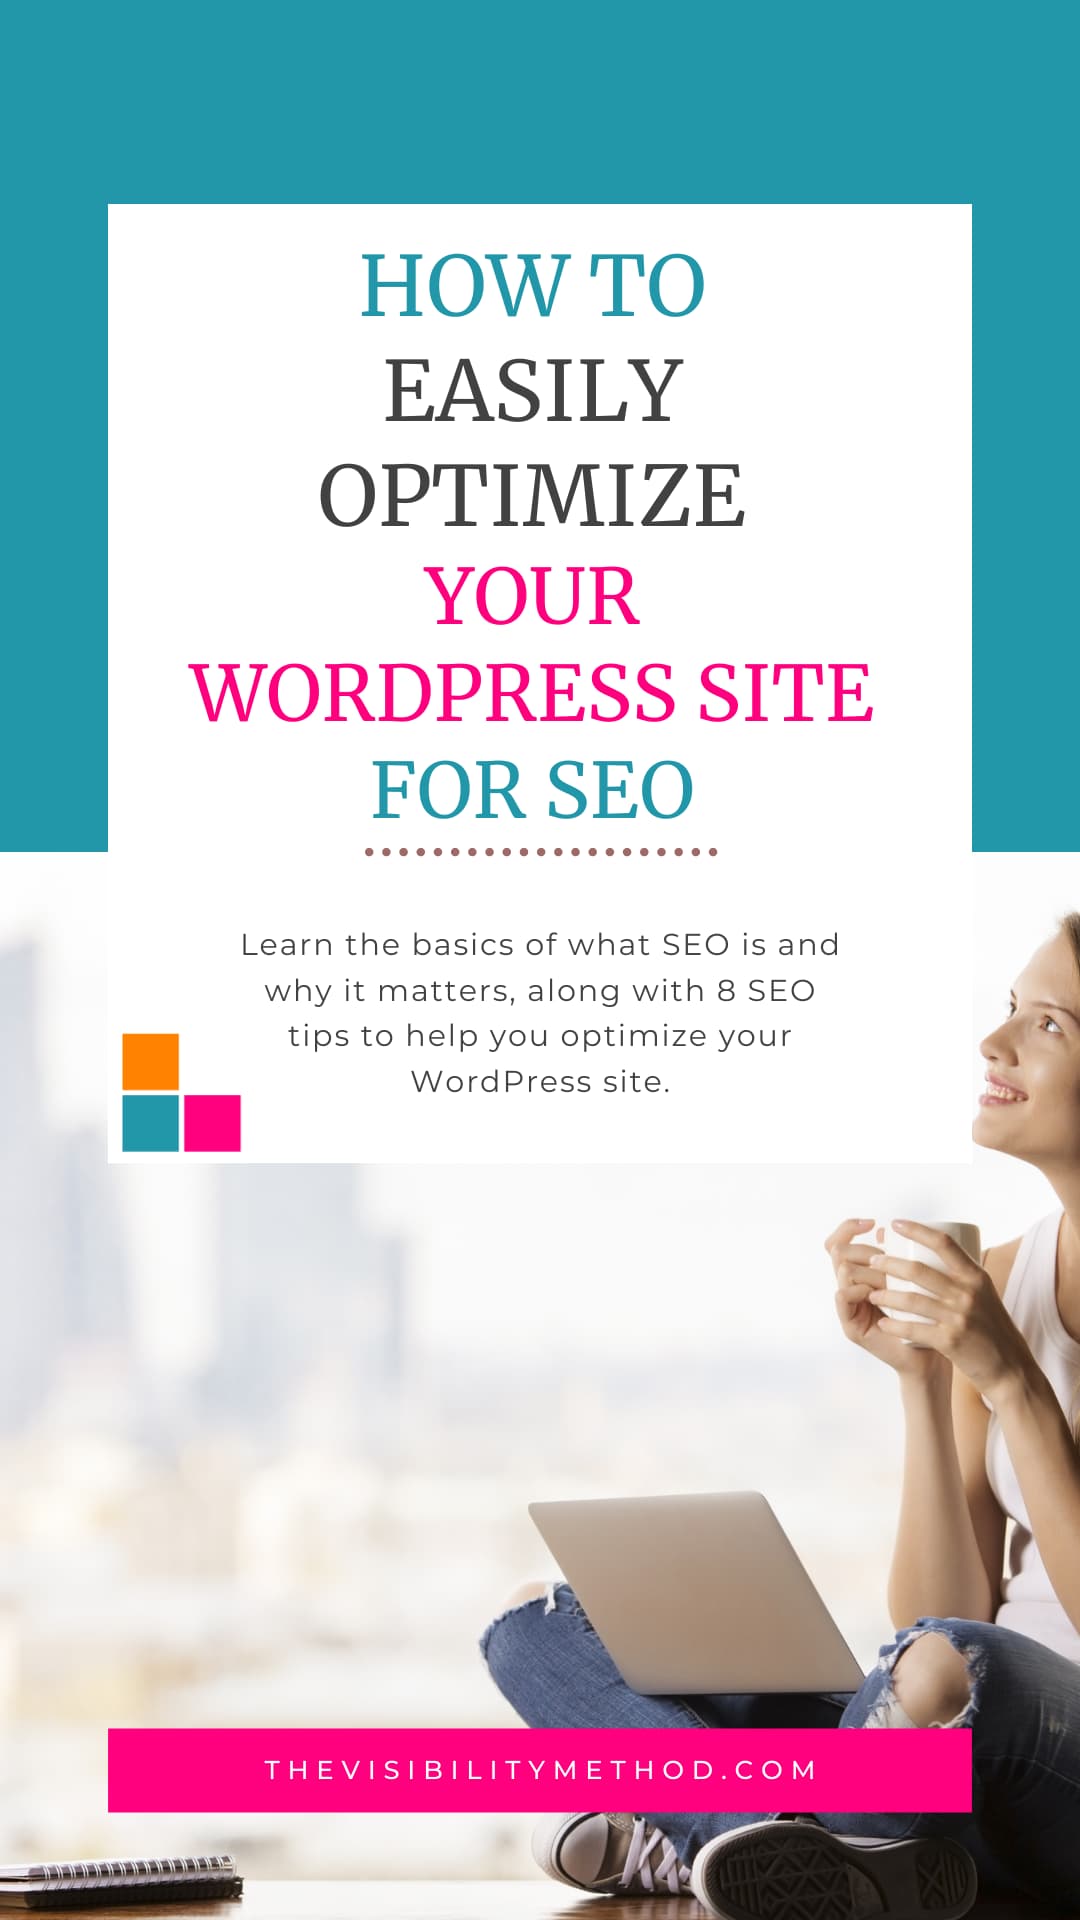 How to Easily Optimize Your WordPress Site: 8 Simple SEO Tips